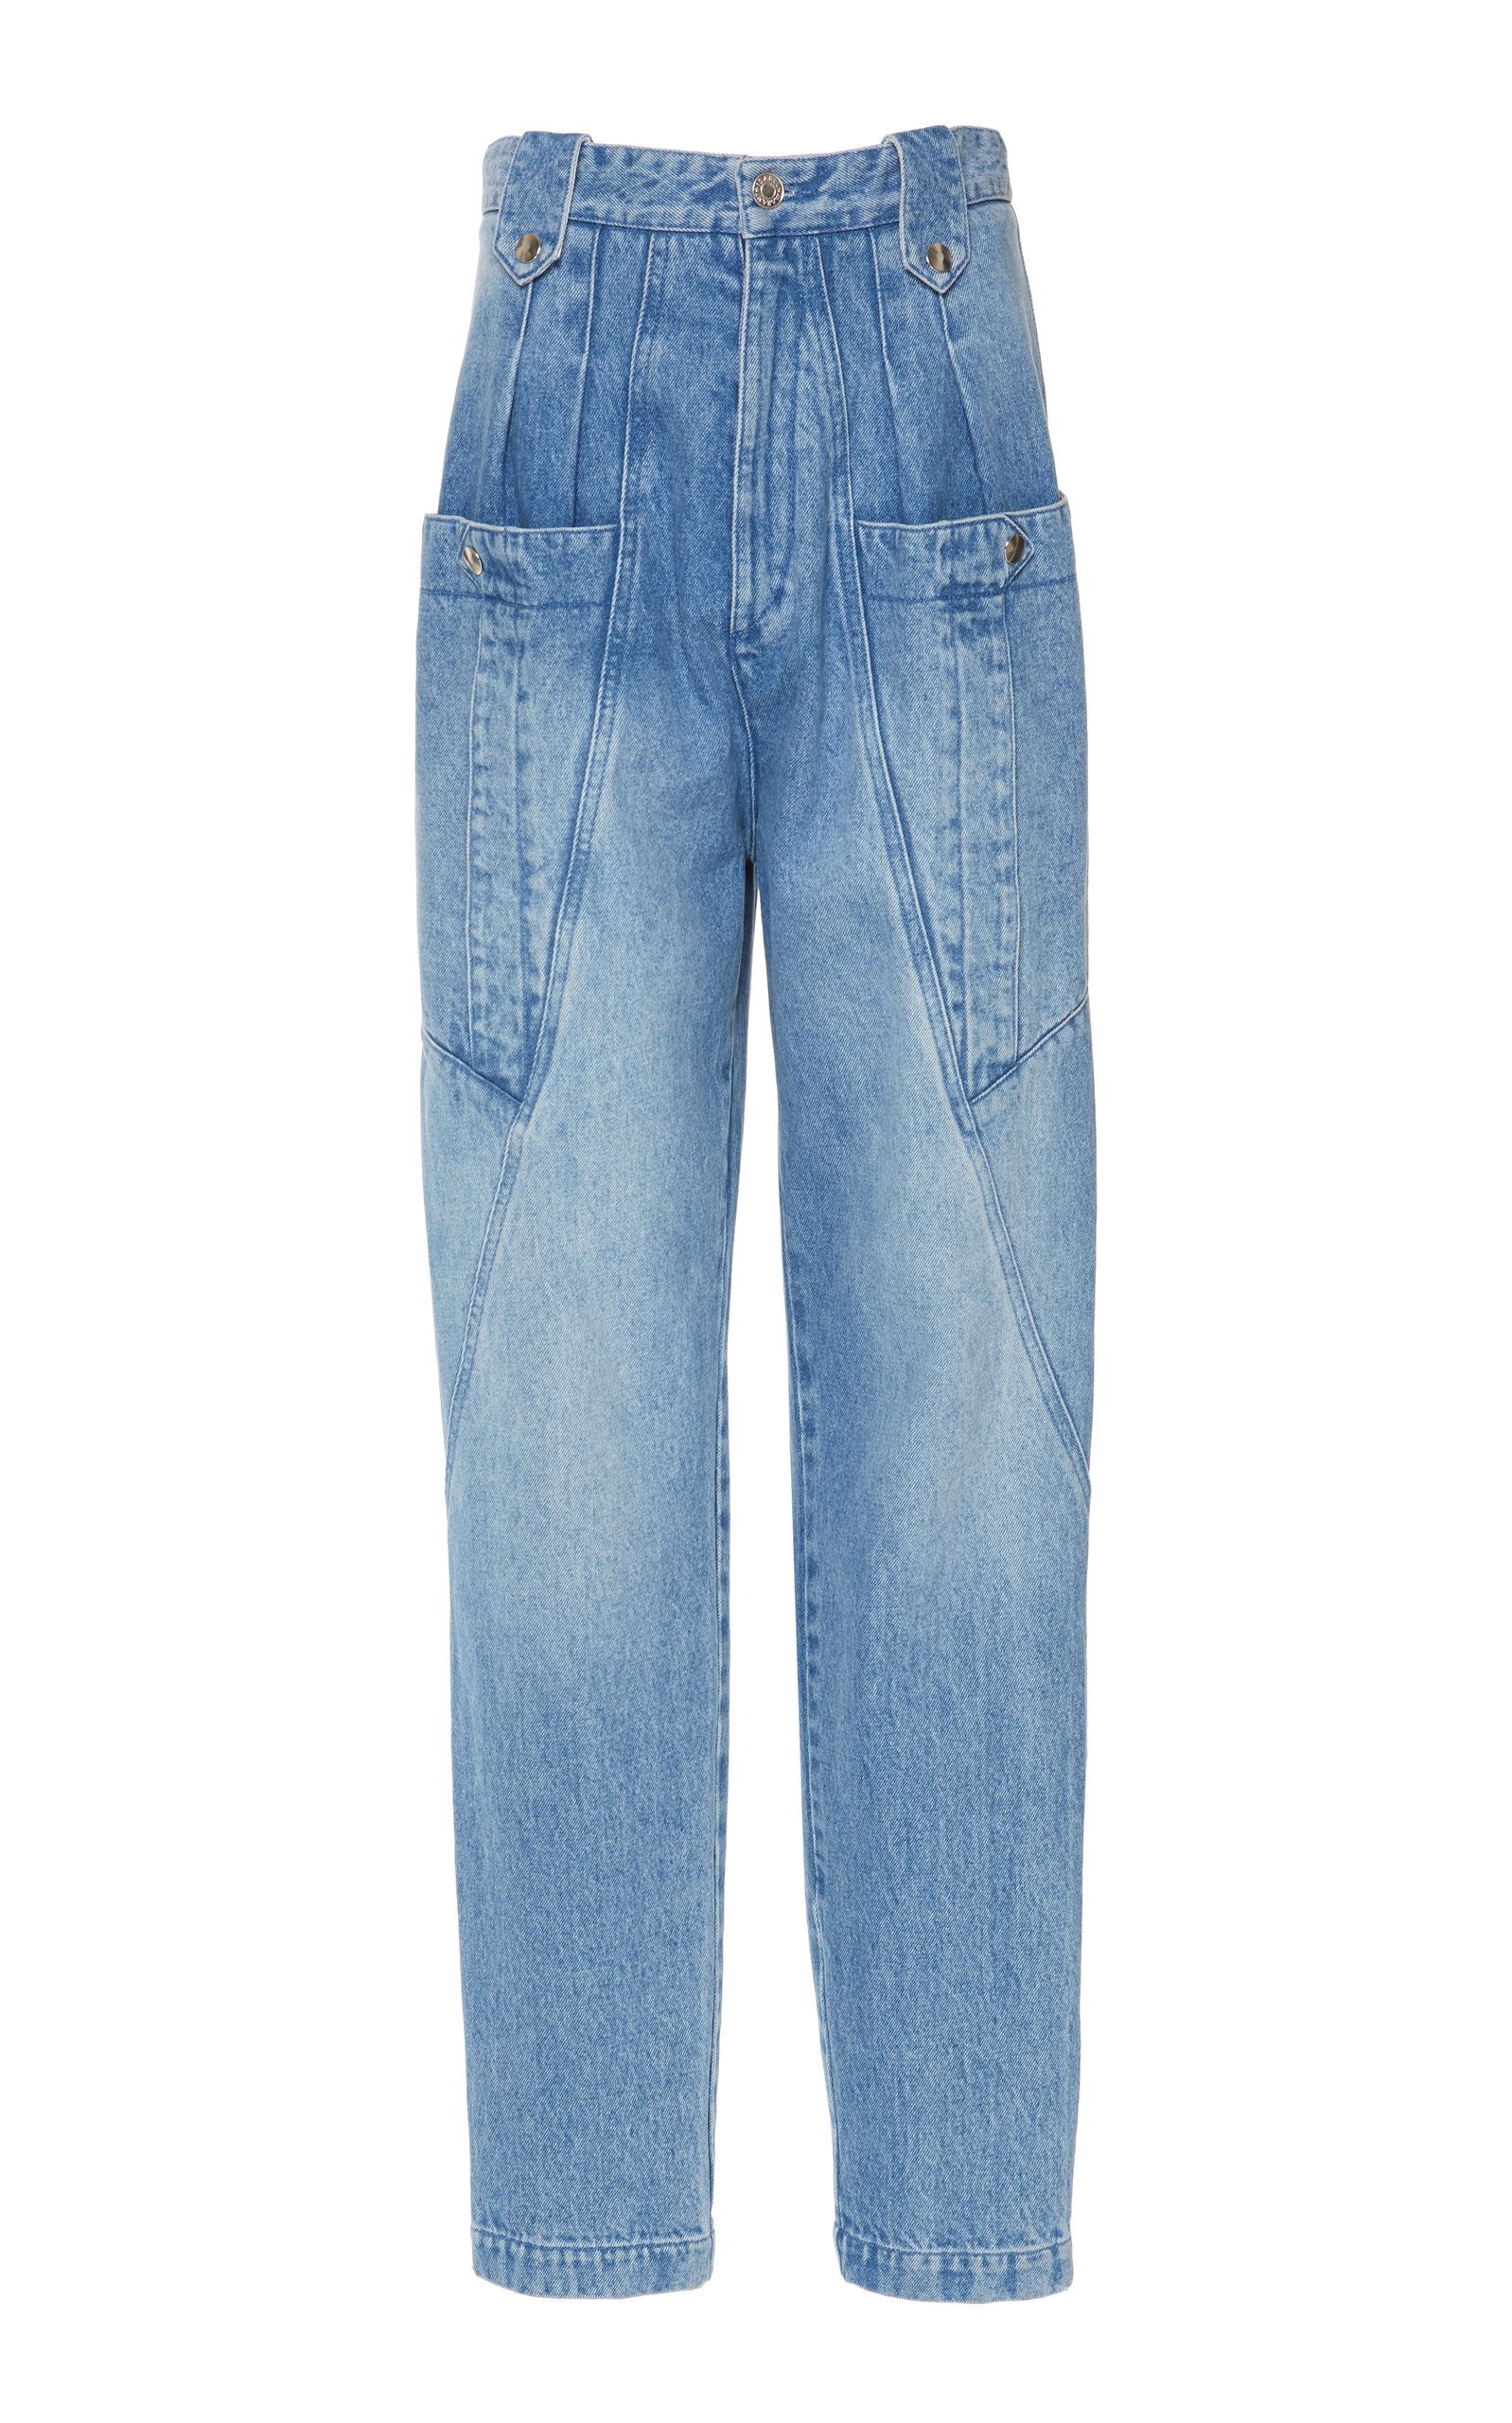 https://hips.hearstapps.com/vader-prod.s3.amazonaws.com/1590599241-large_isabel-marant-light-wash-kerris-high-rise-tapered-jeans.jpg?crop=1xw:1xh;center,top